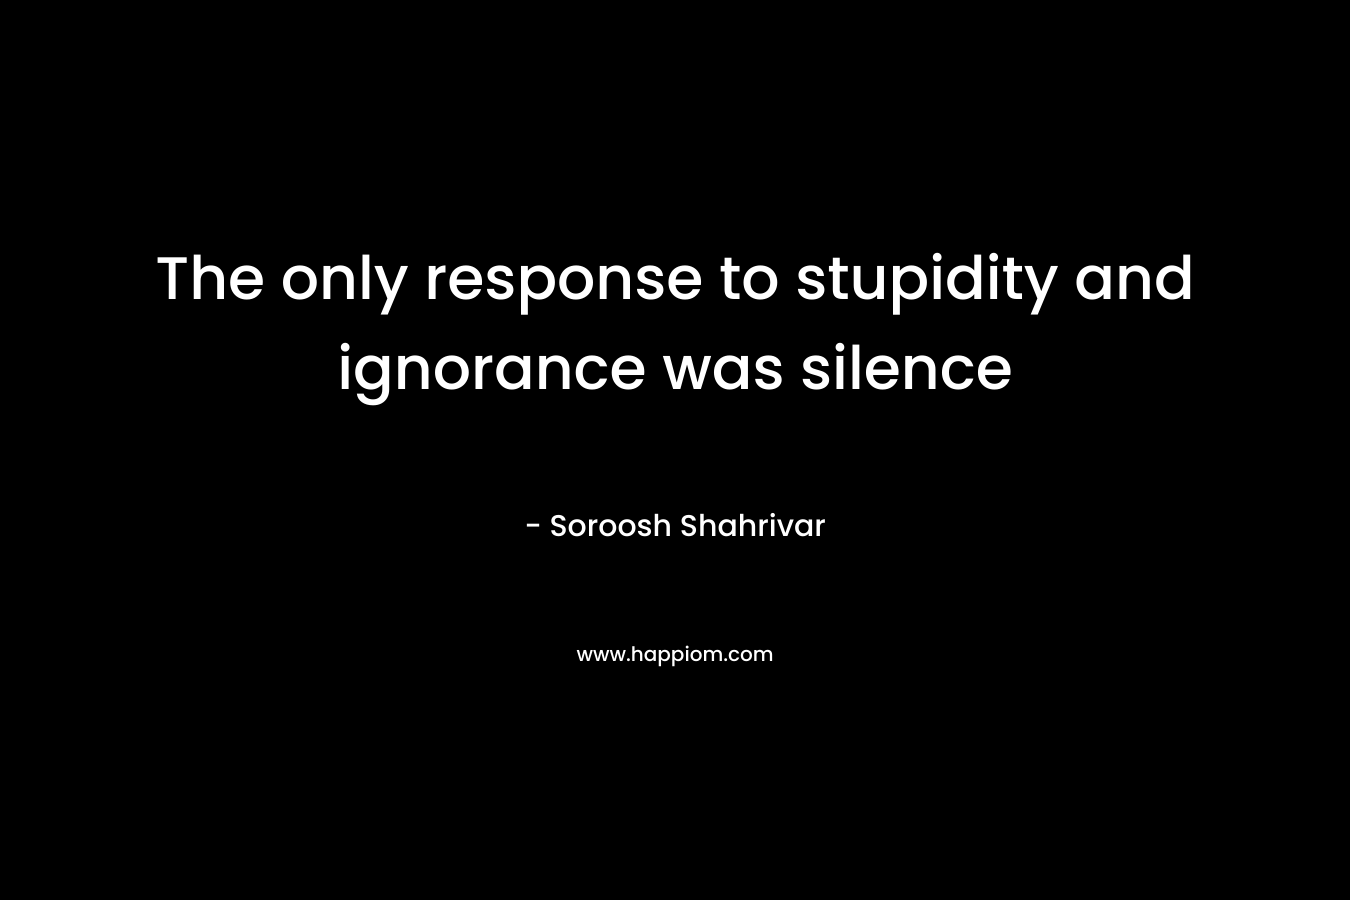 The only response to stupidity and ignorance was silence – Soroosh Shahrivar